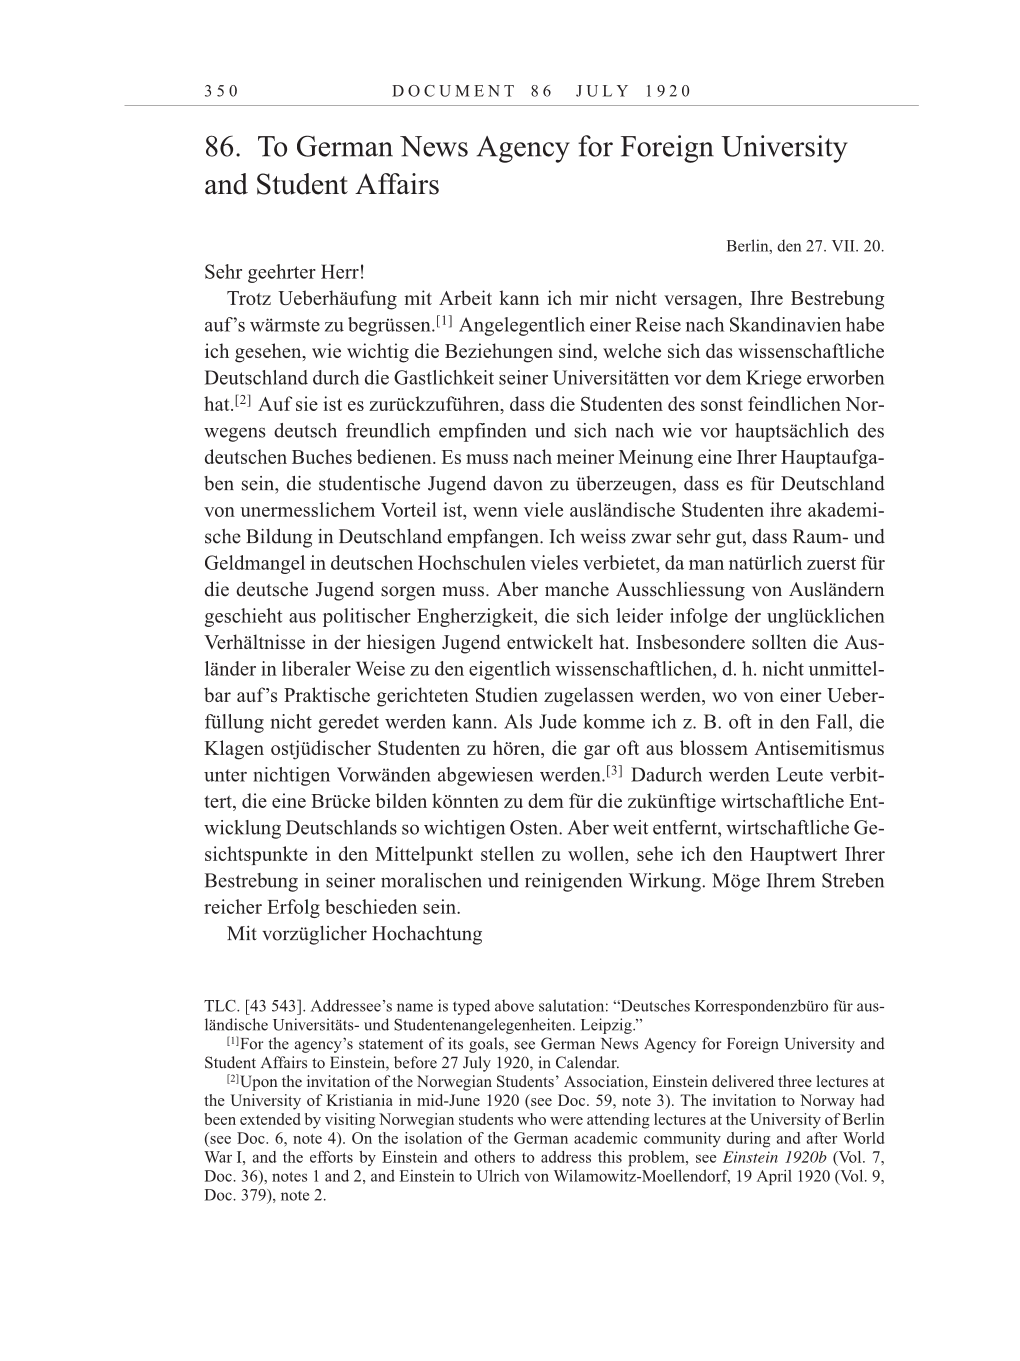 Volume 10: The Berlin Years: Correspondence May-December 1920 / Supplementary Correspondence 1909-1920 page 350